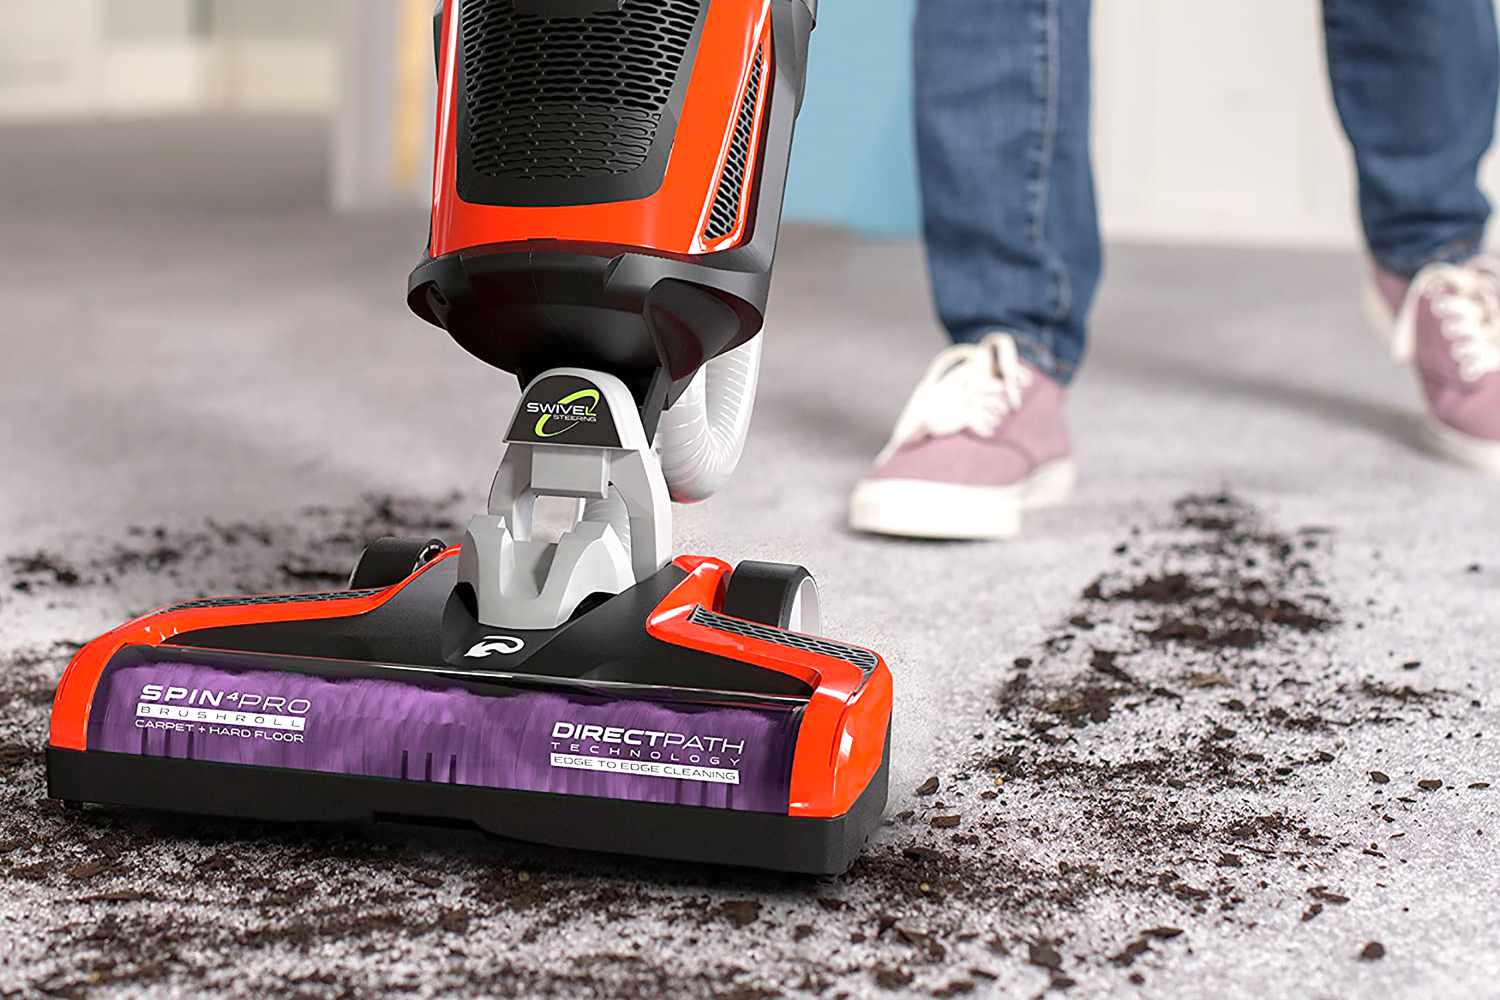 This Lightweight Pet Vacuum Is Easy to Maneuver and Offers 'Incredible Suction'—and It's Under $100 Right Now